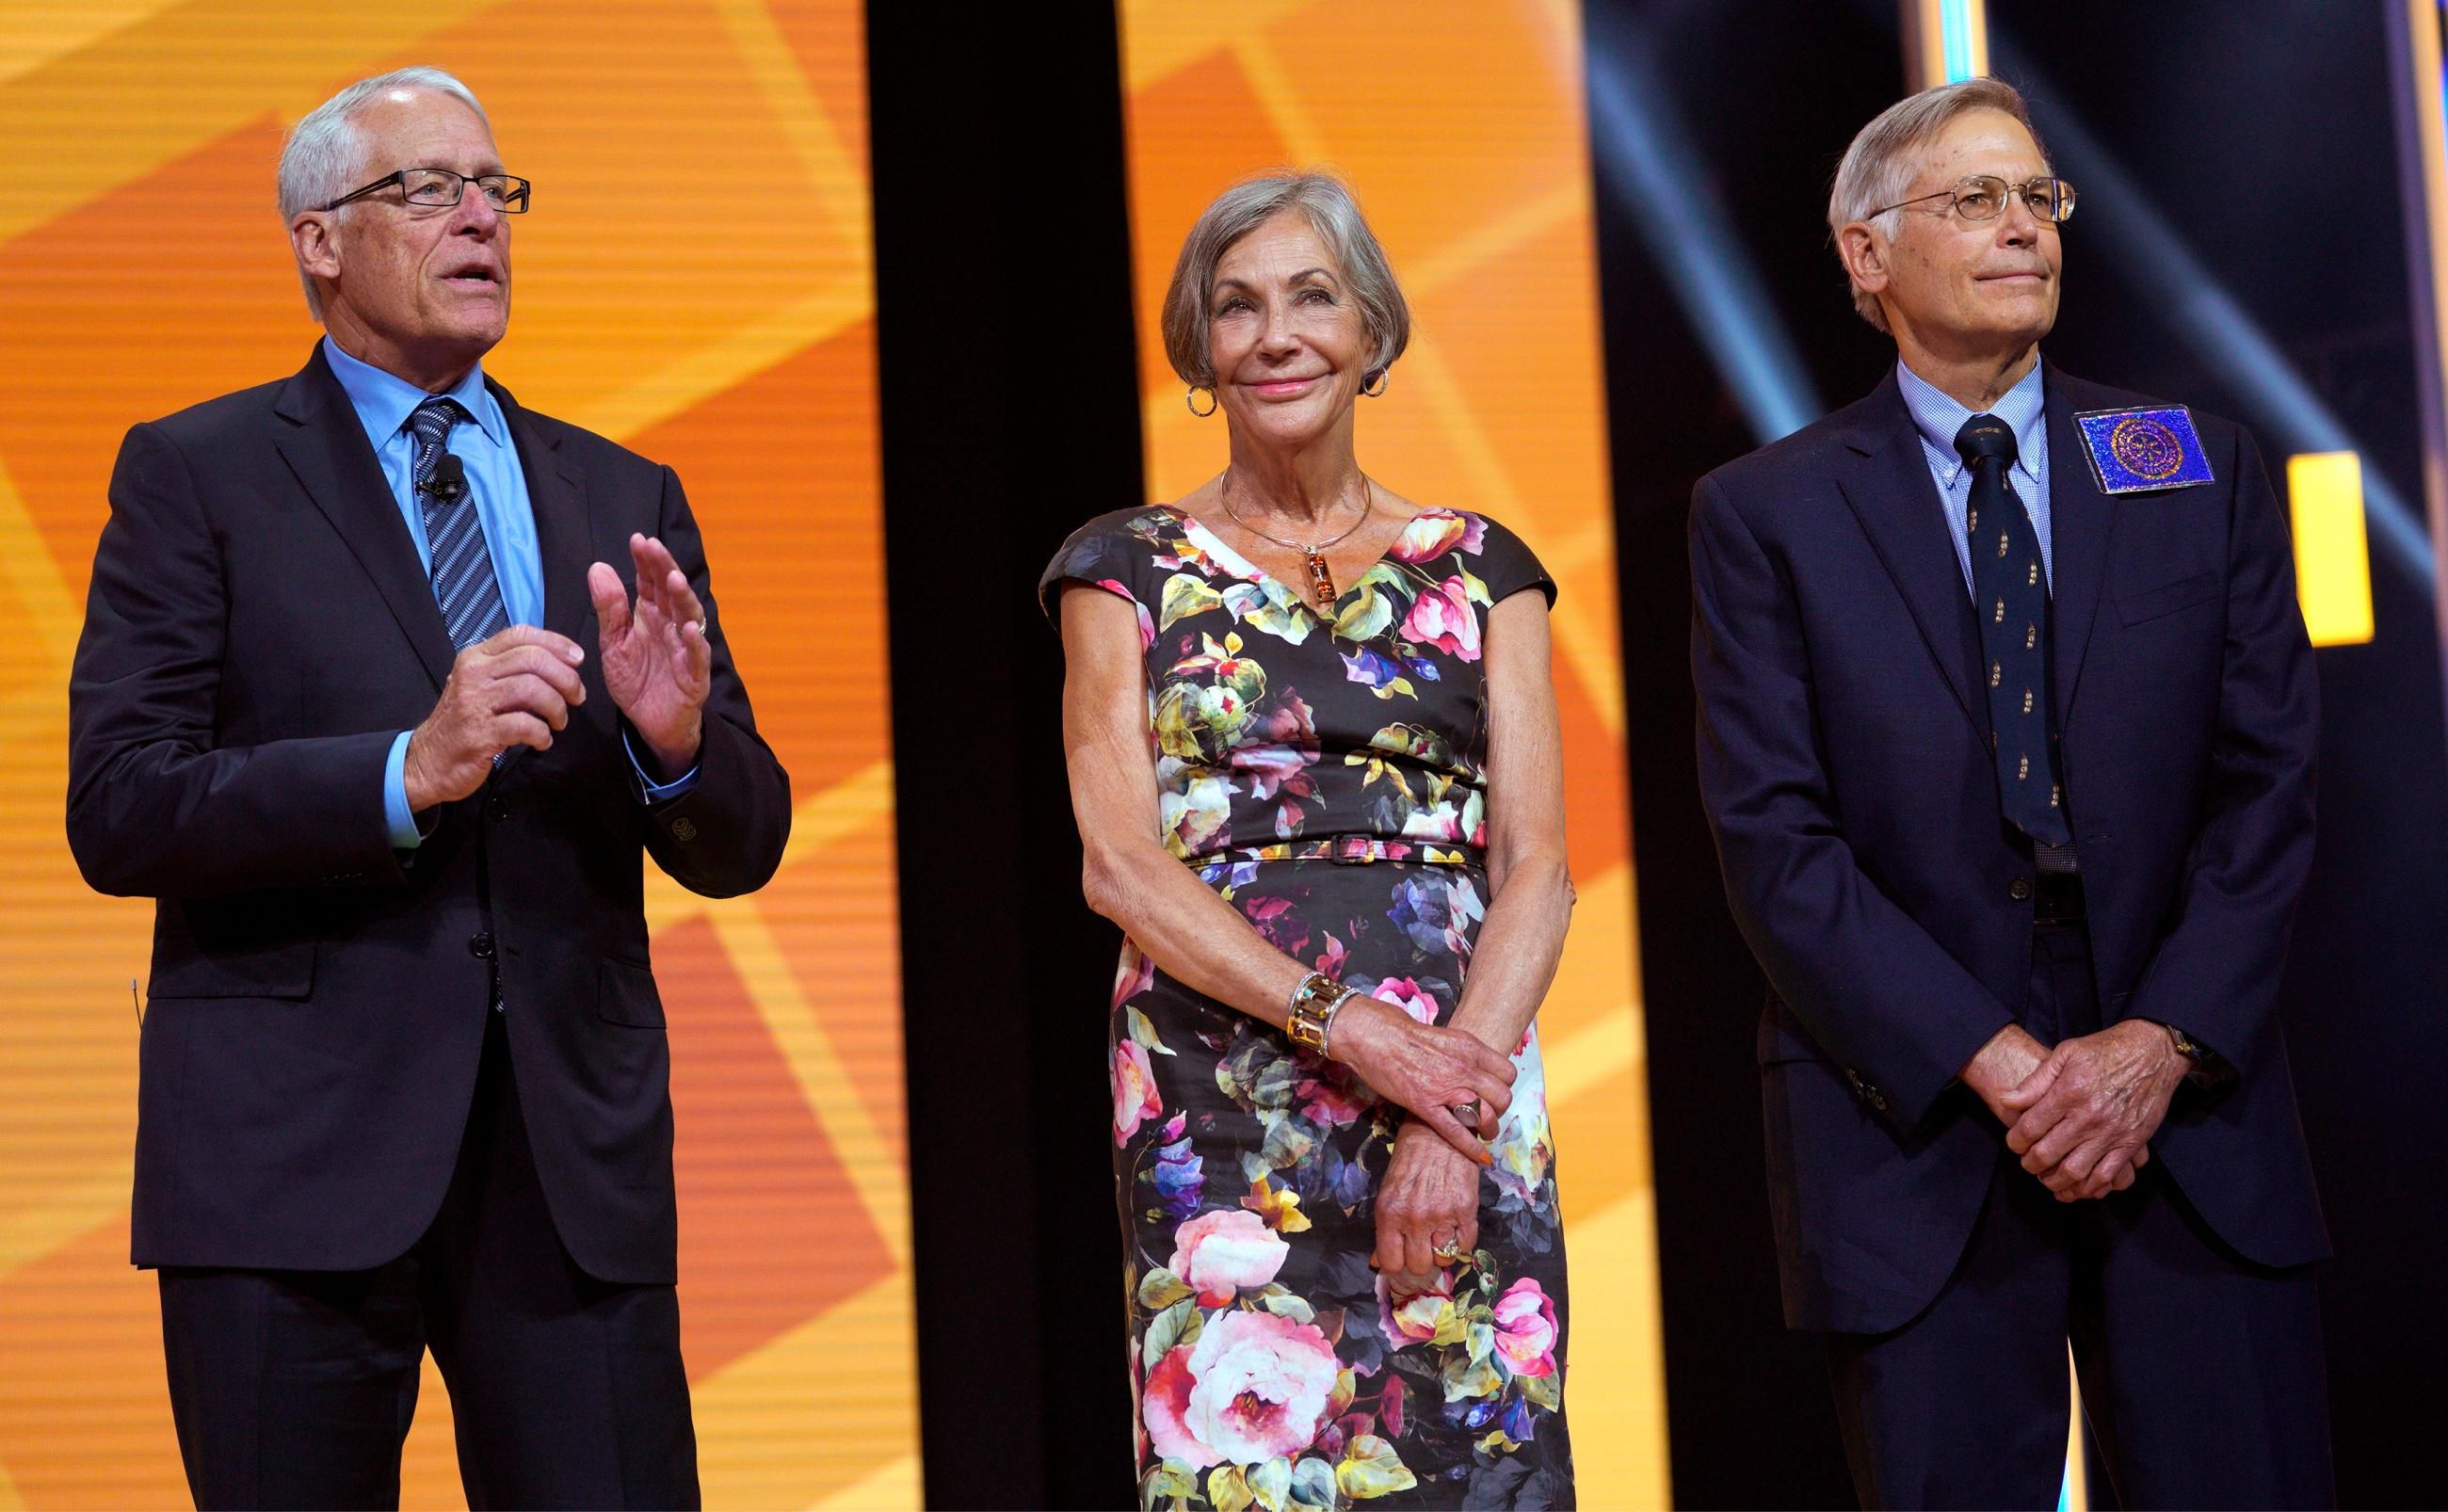 Members of the Walton family (L-R) Rob, Alice, and Jim speak during the annual Walmart shareholders meeting event on June 1, 2018 in Fayetteville, Arkansas. (Photo: Rick T. Wilking via Getty Images)